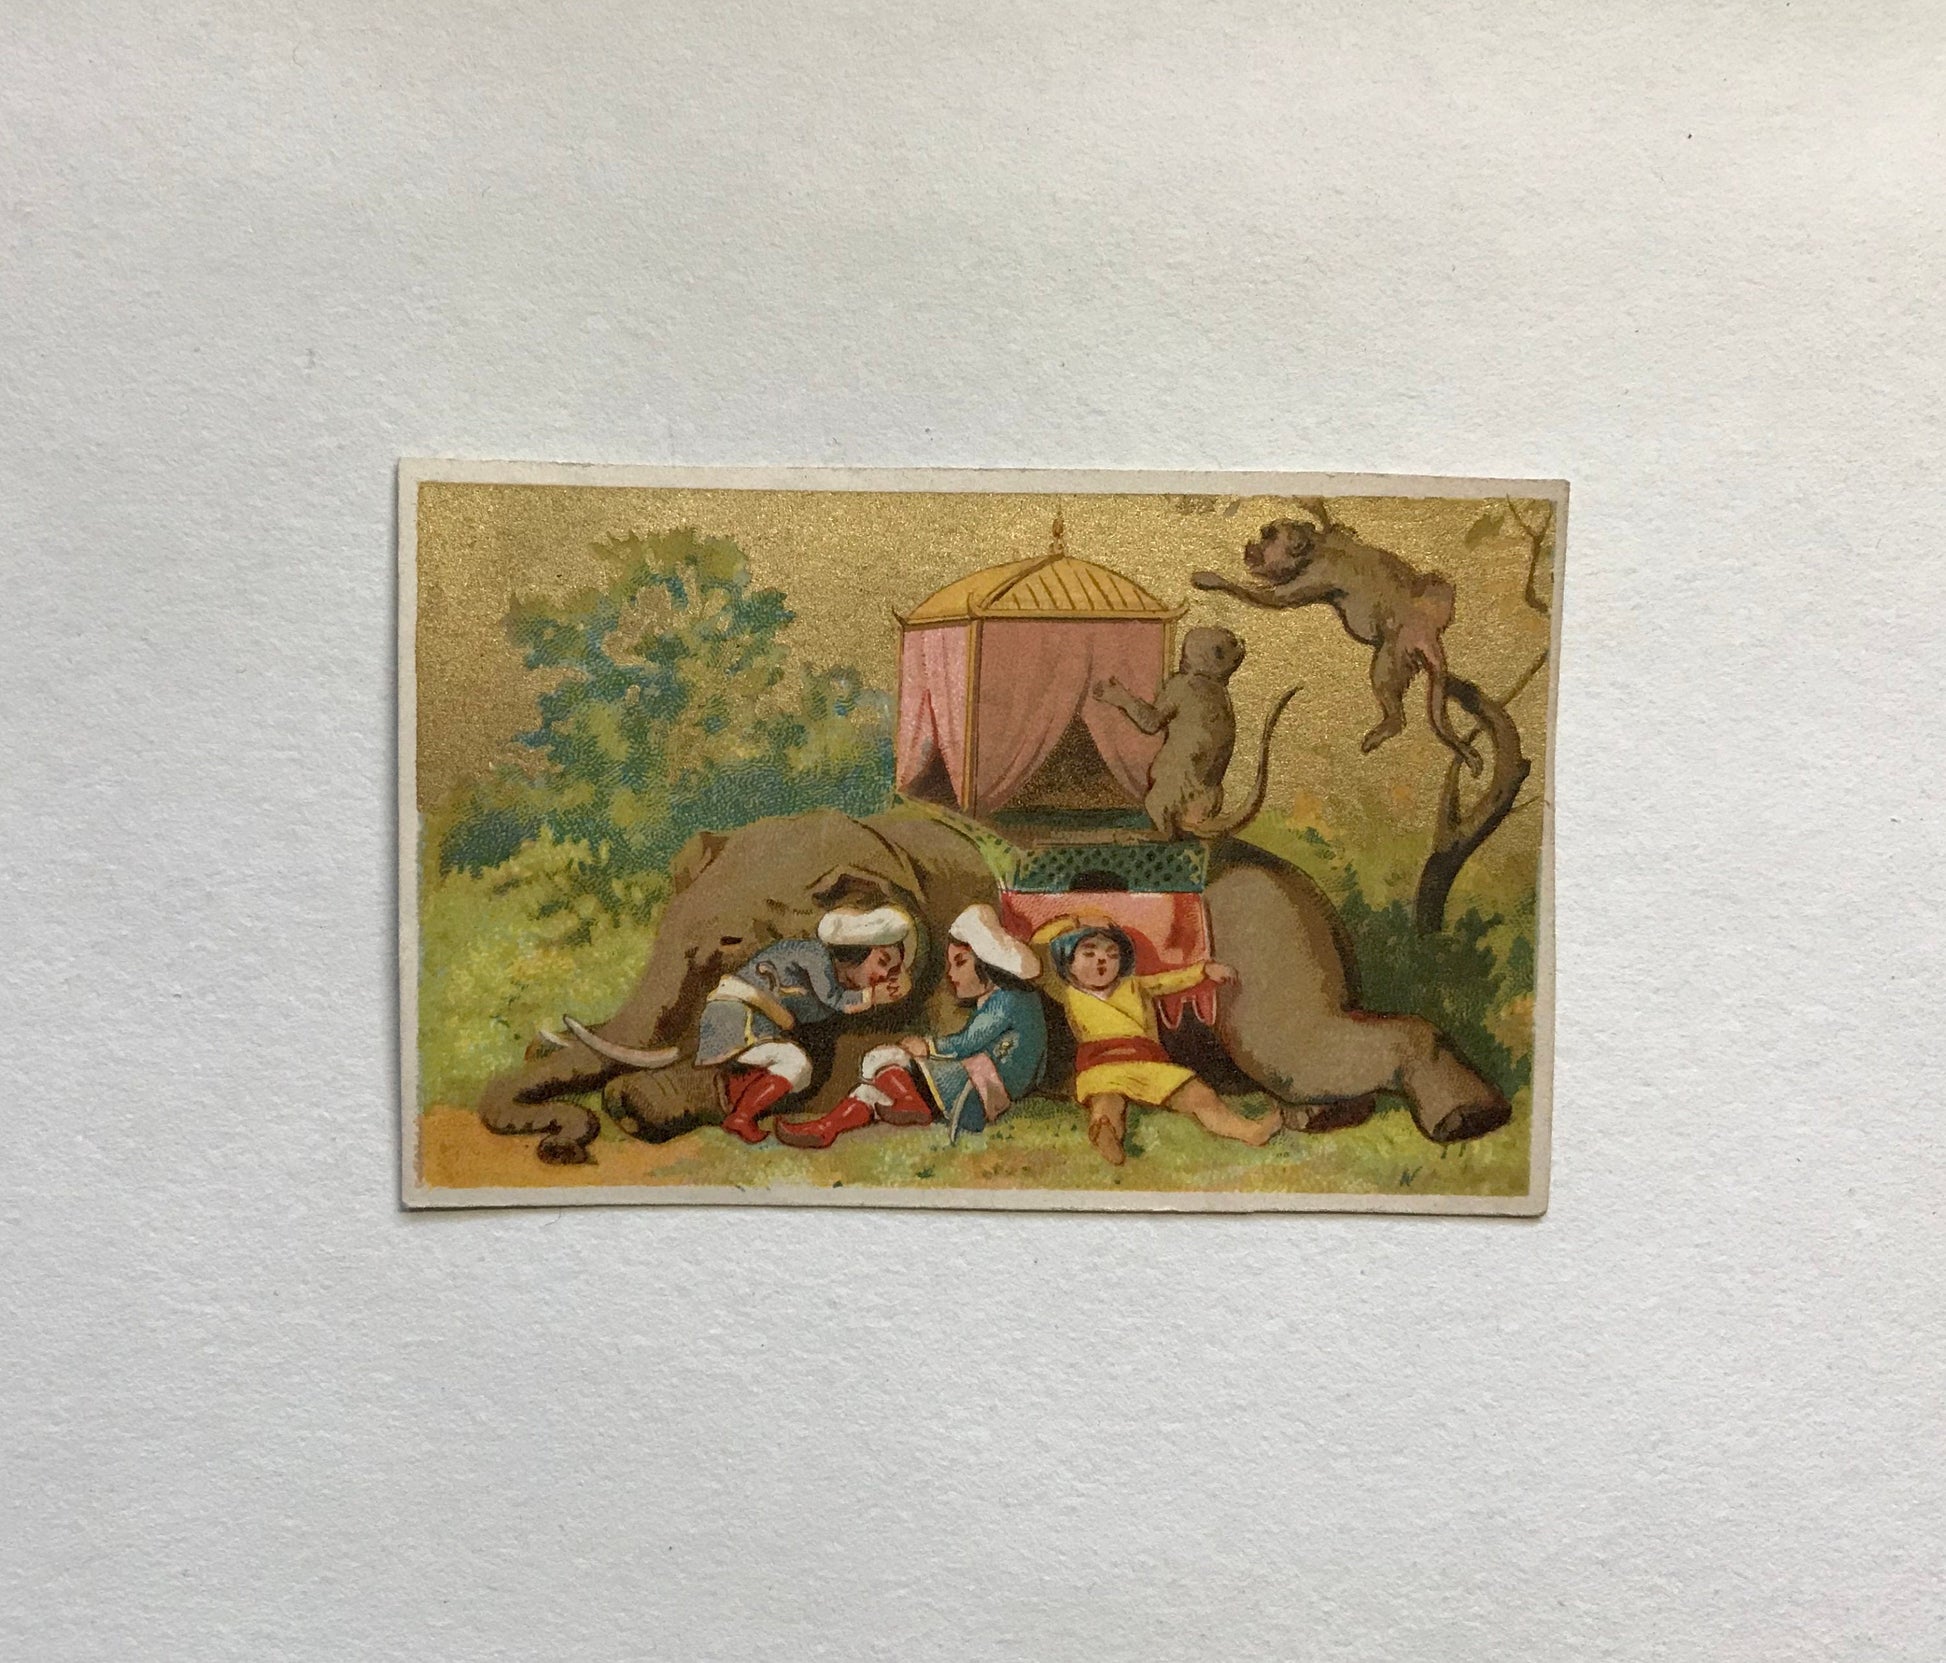 A Set of 6 French Trade Cards. Featuring the adventures of three mahouts and an elephant. Late 19th century. Size: 10 x 6.4 cms.